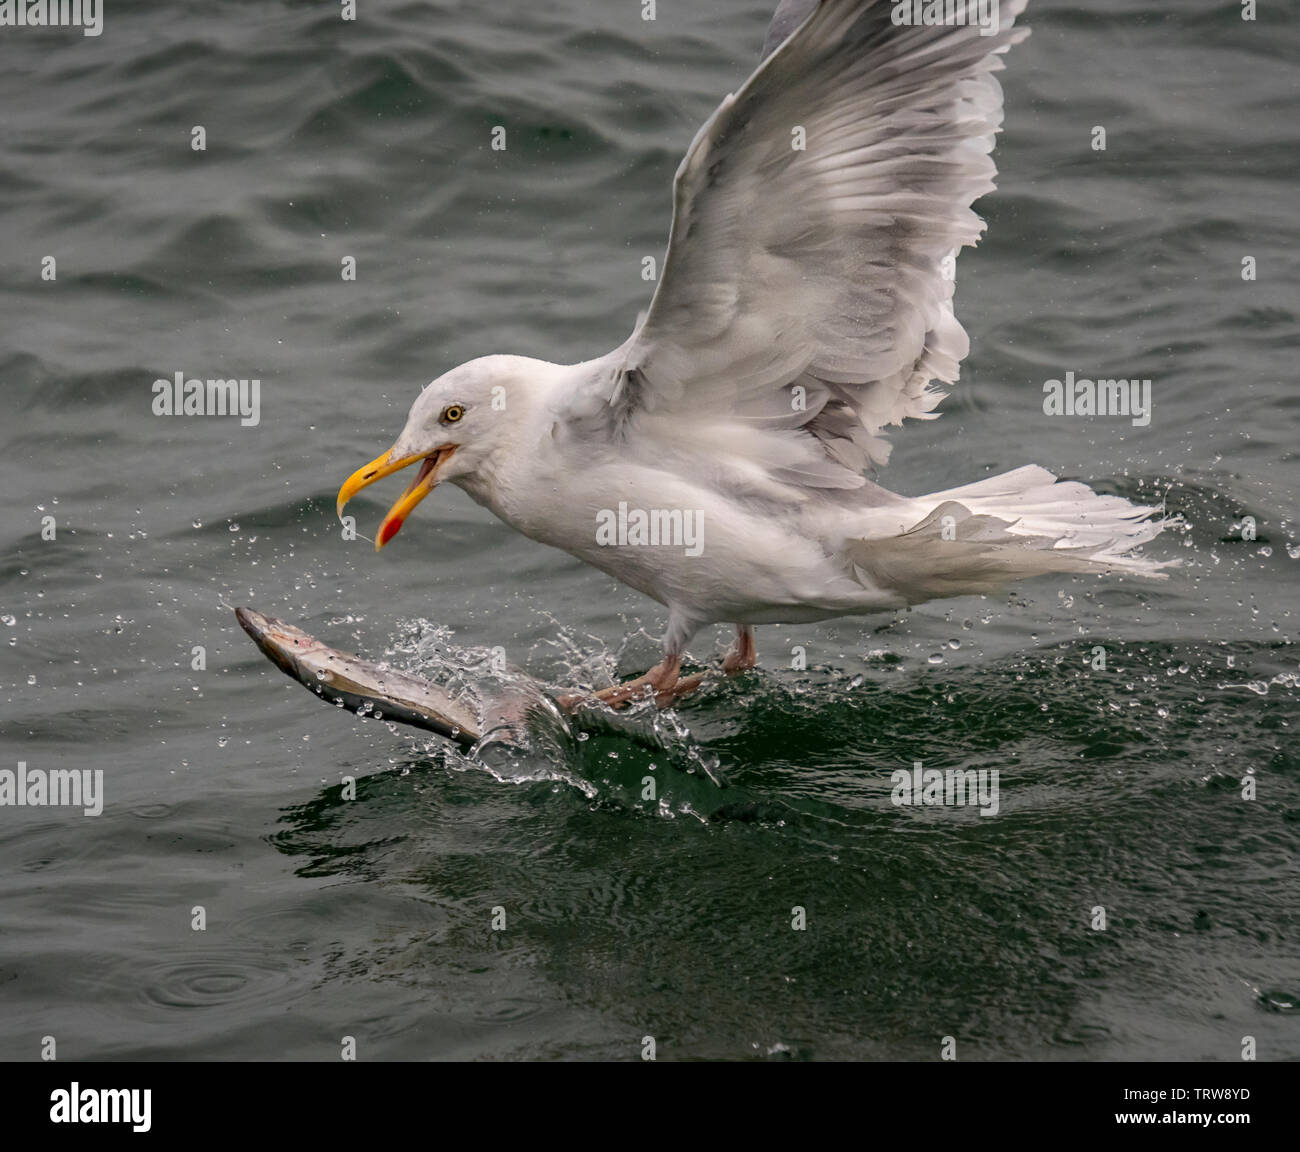 A Seagull appears to be surfing on back of fish, off Bempton Cliffs, East Yorkshire, UK Stock Photo